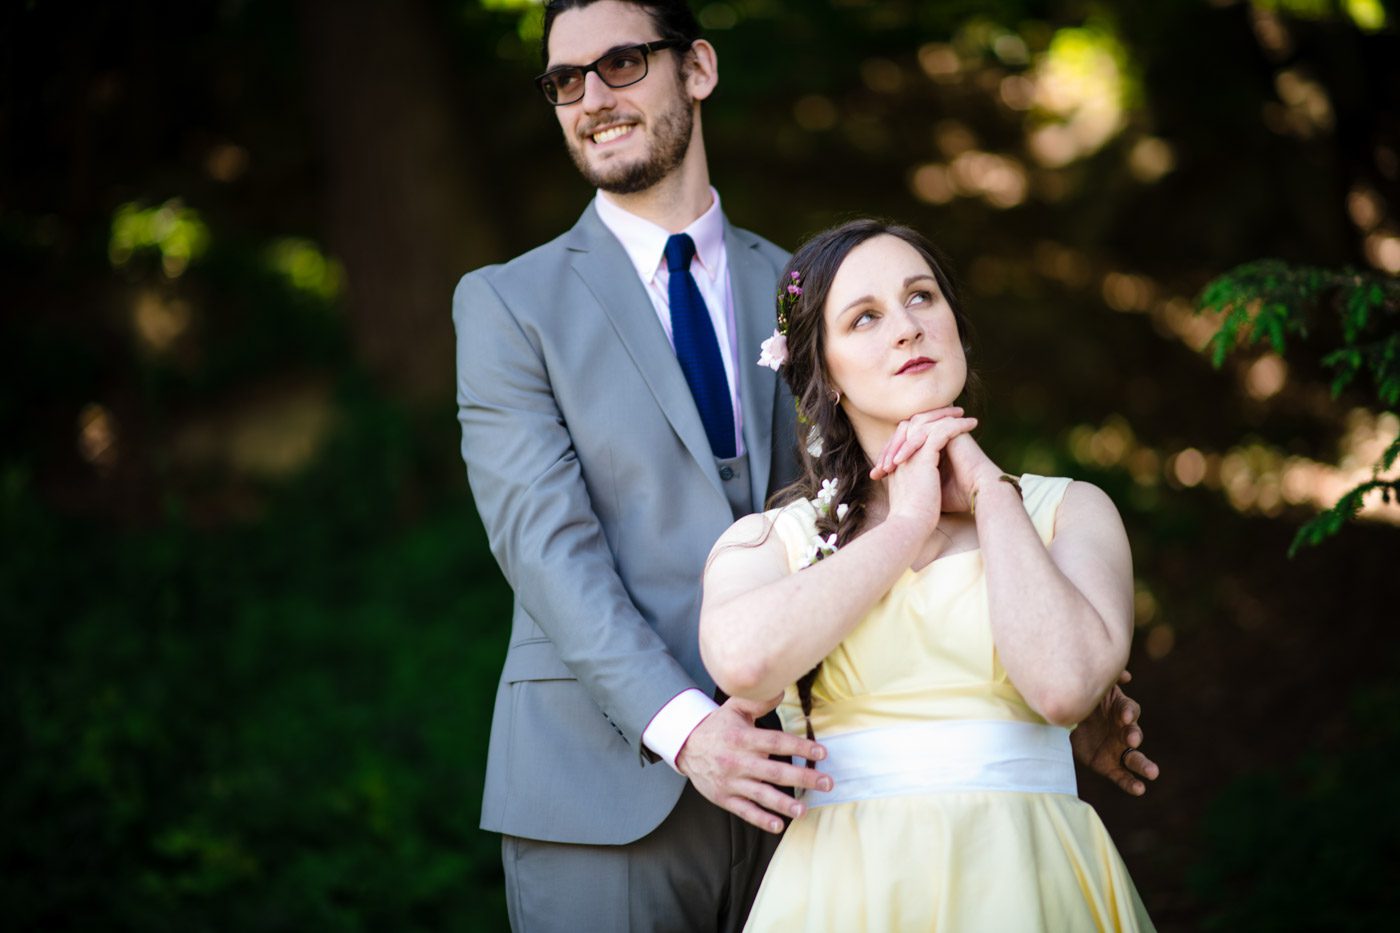 groom-smiling-in-back-of-bride-who-is-daydreaming-in-the-garden